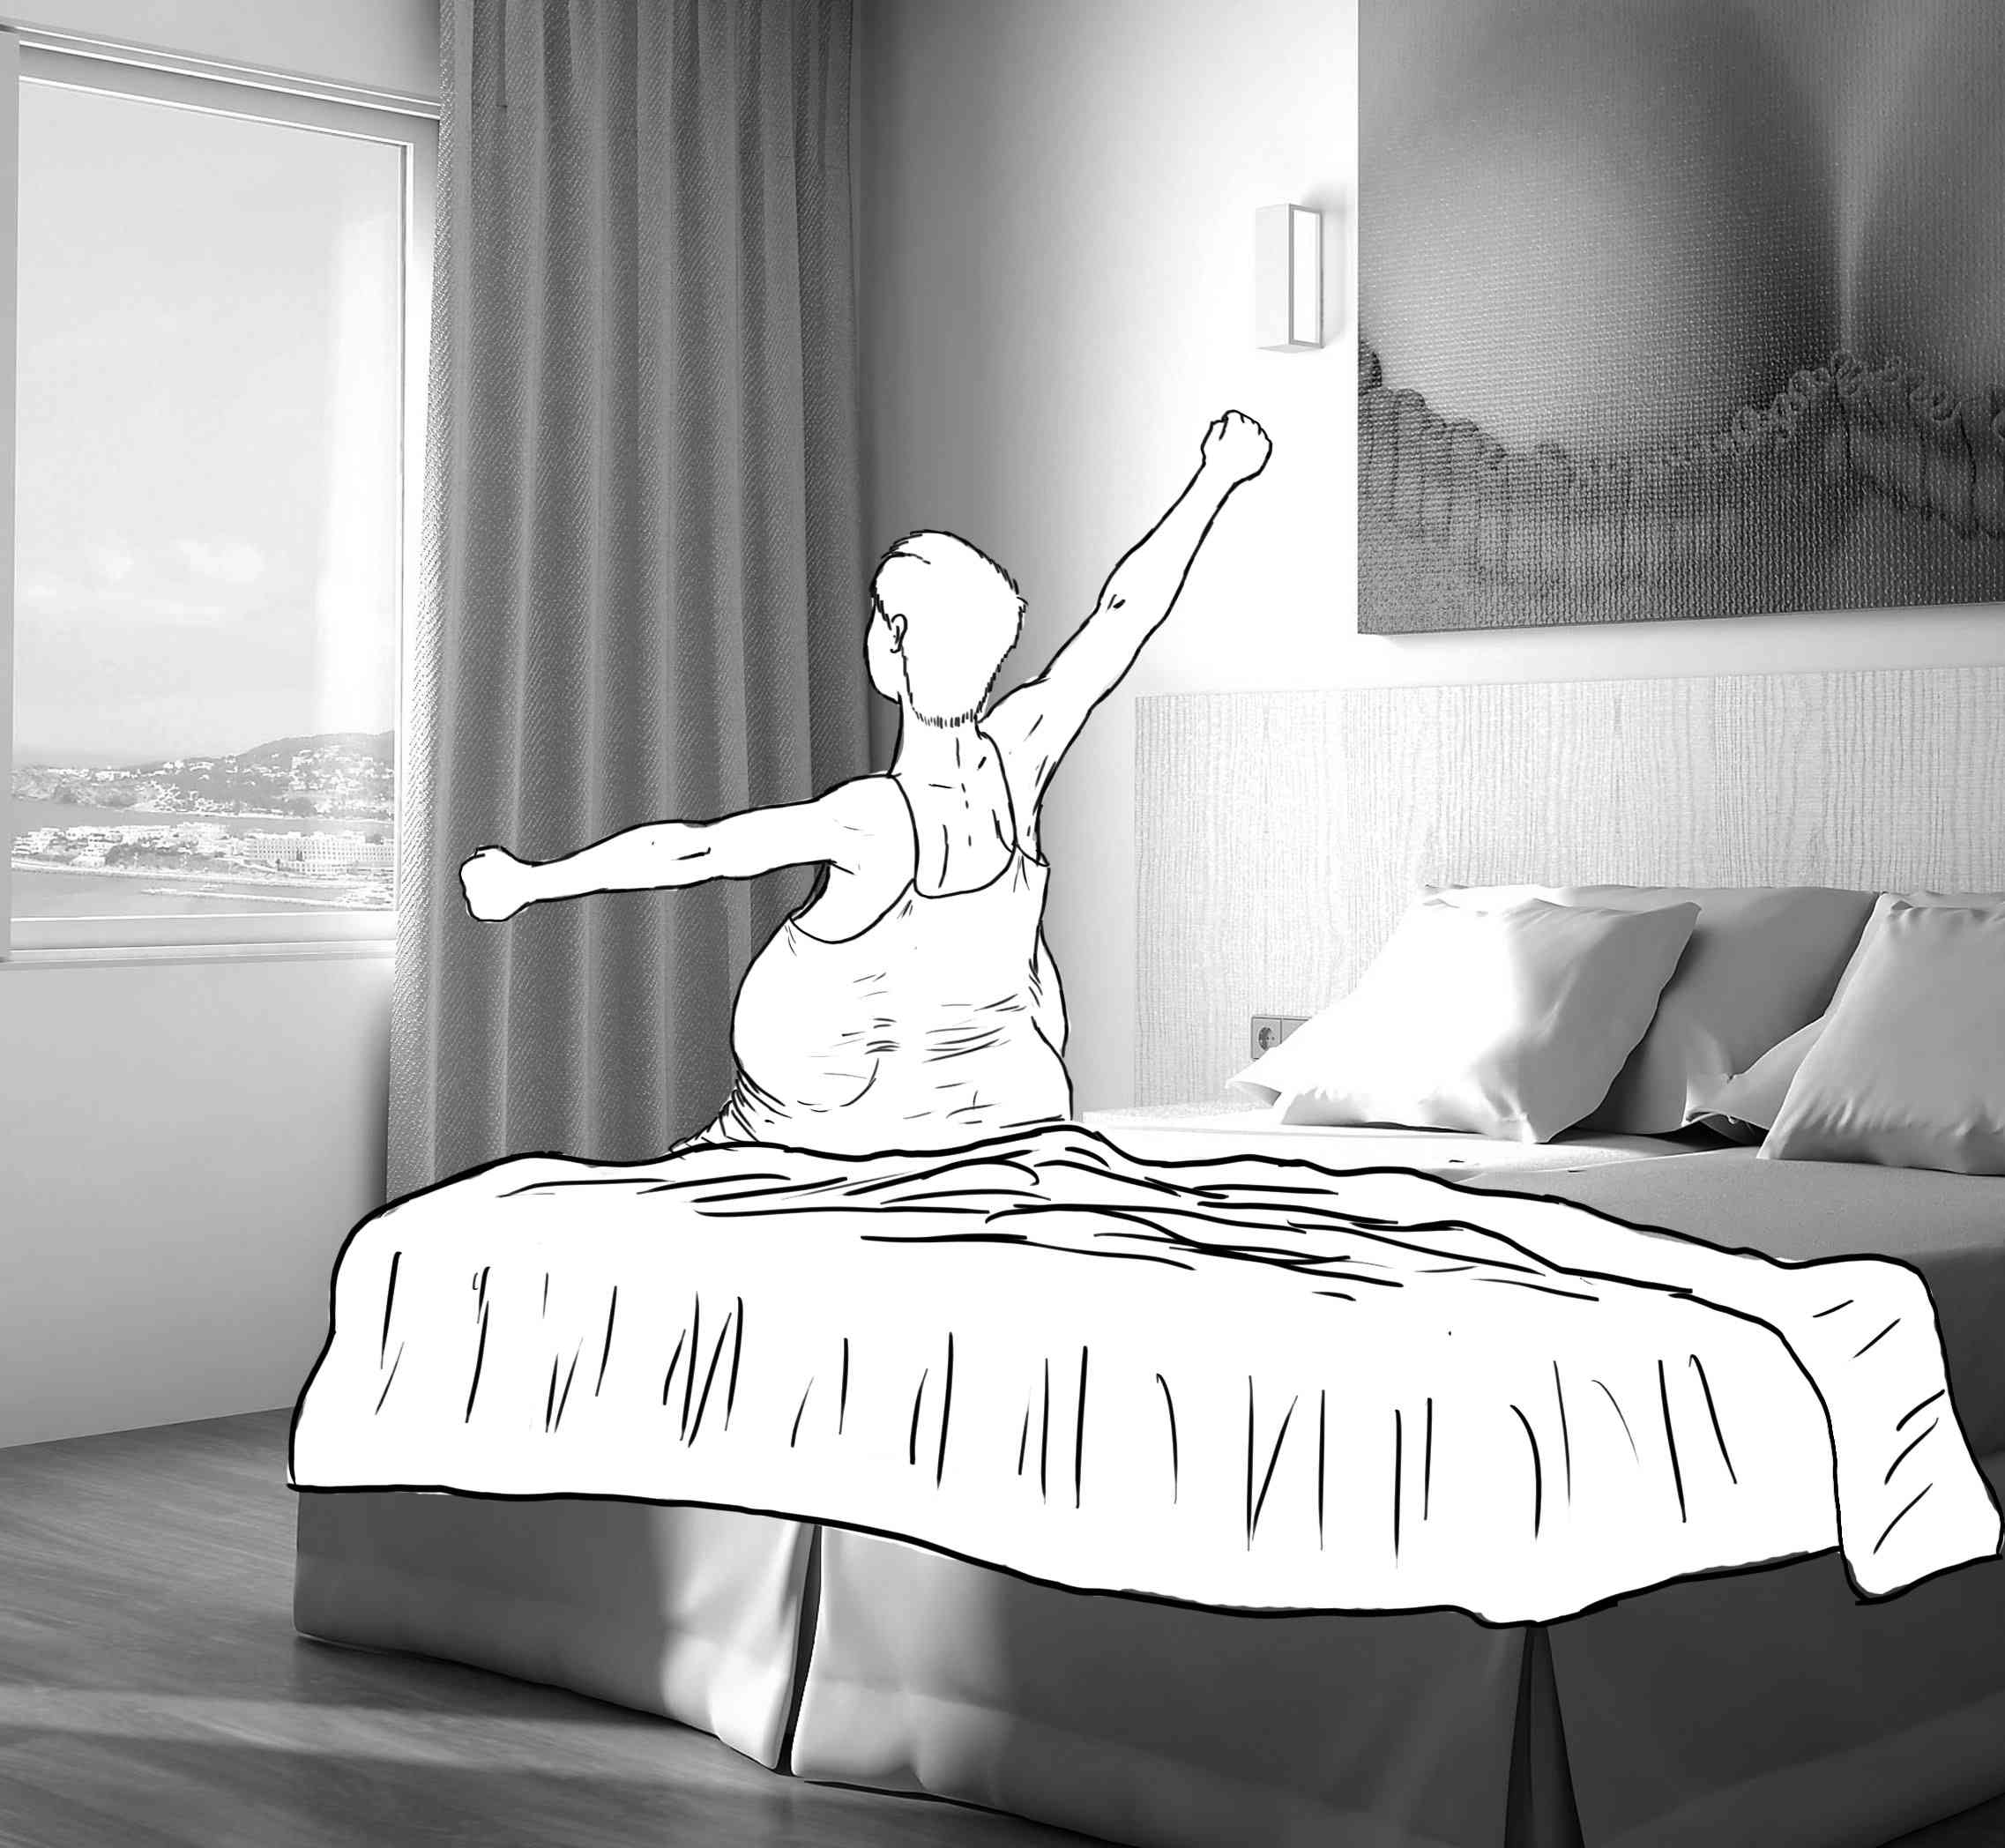 Arms-up stretching, seated at the side of the bed